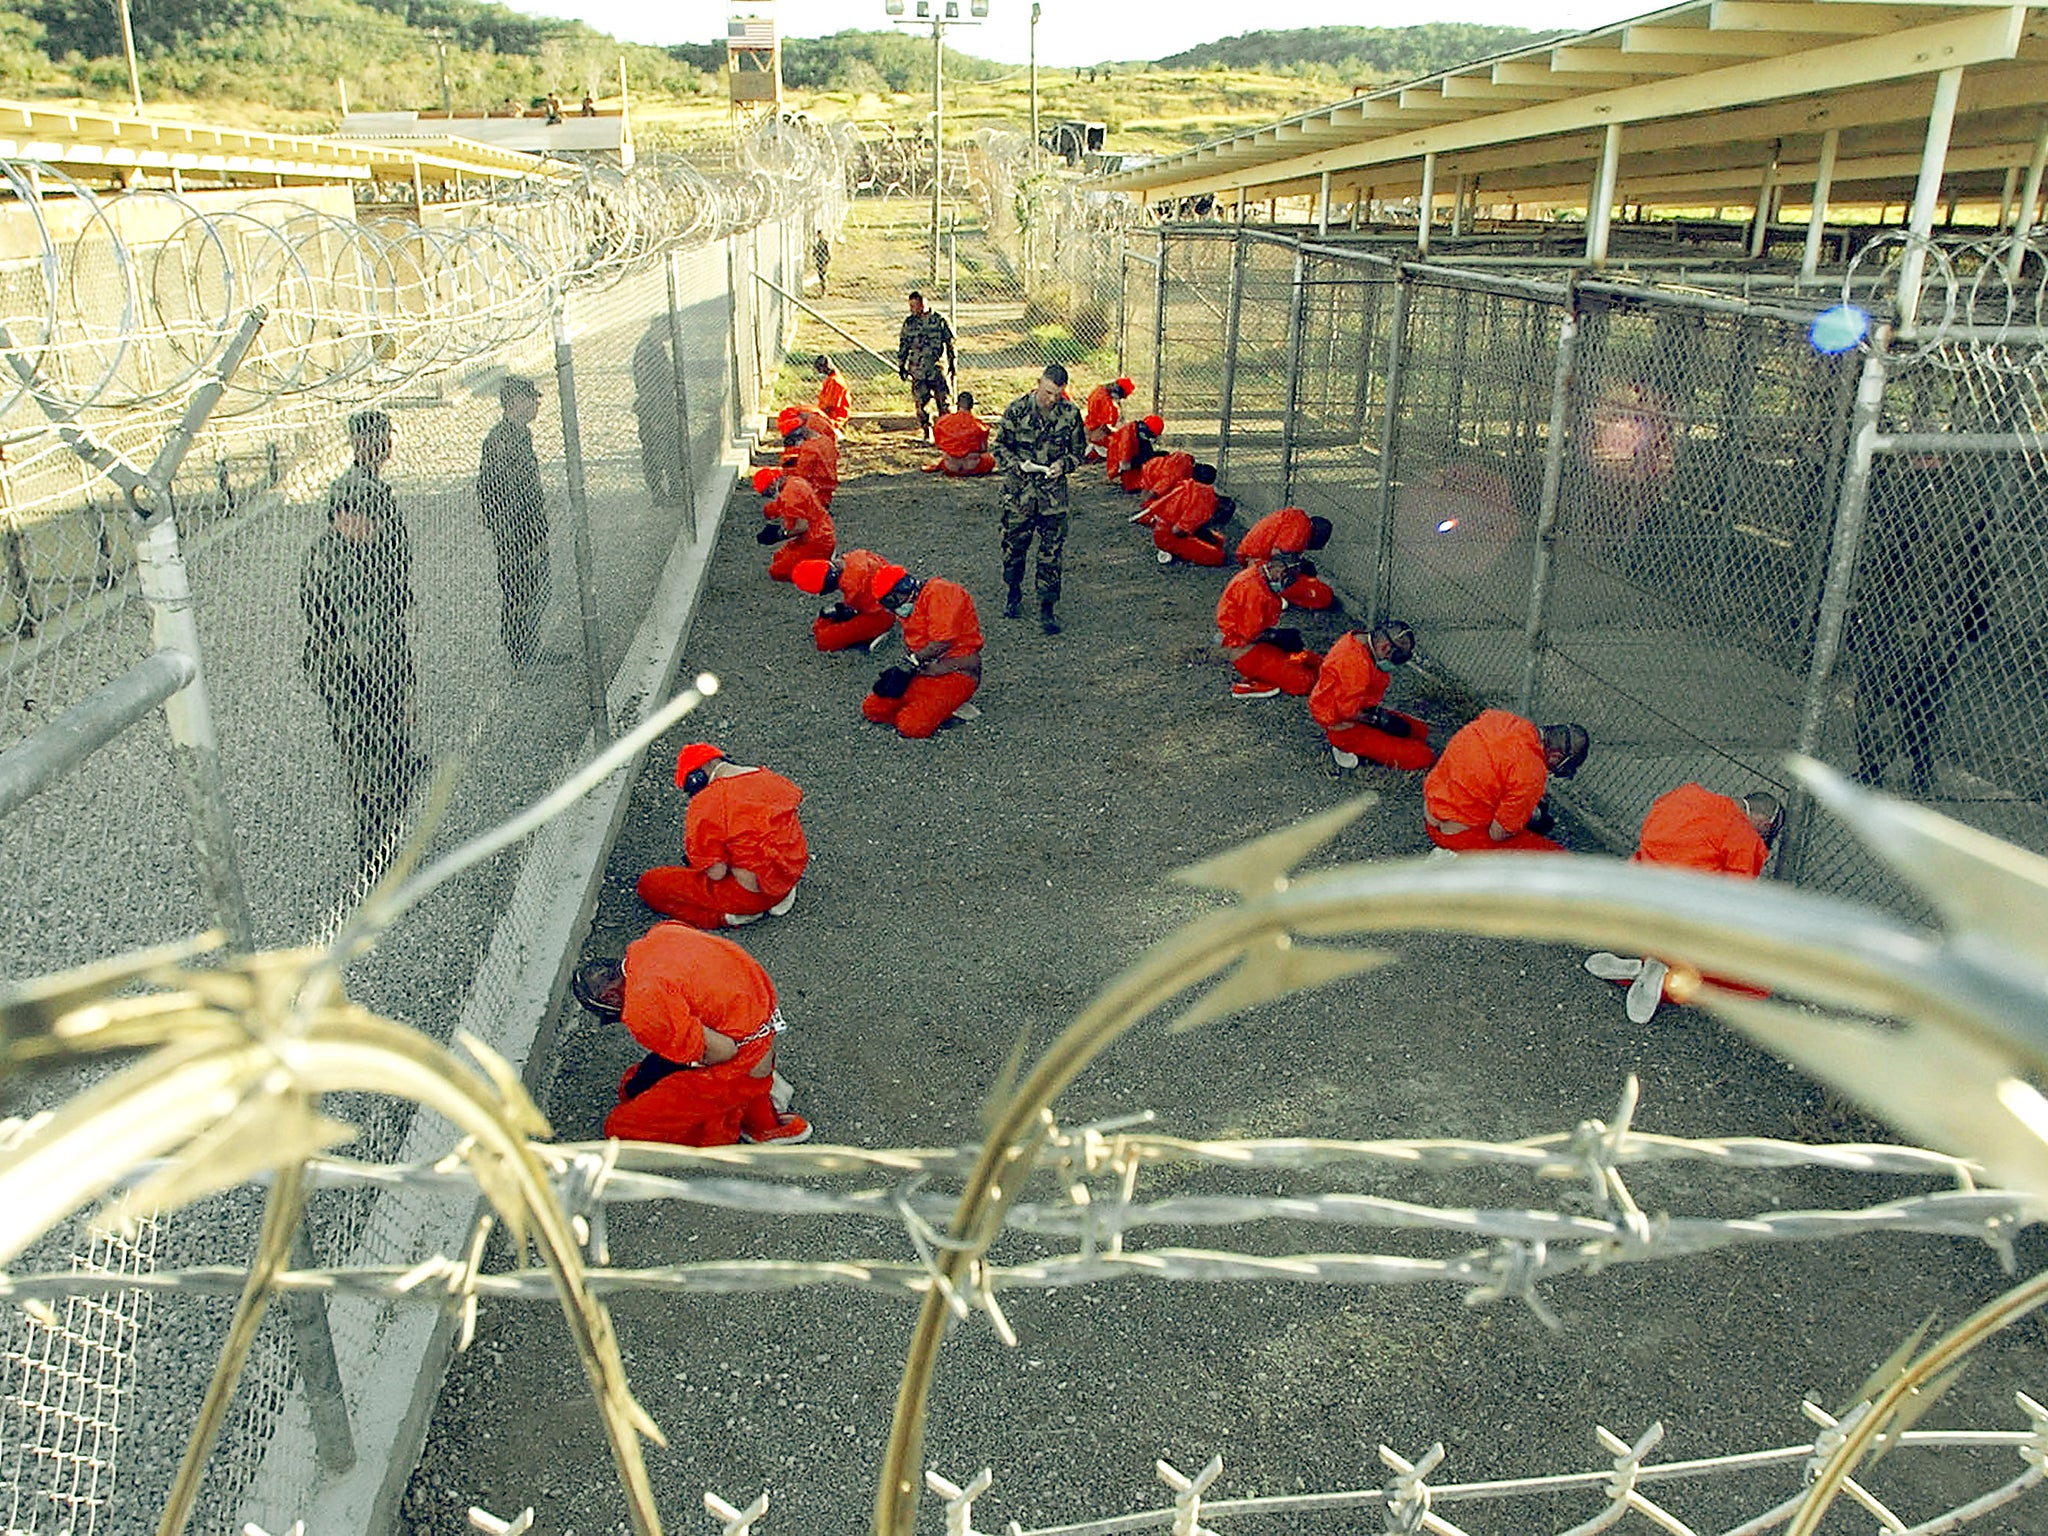 US Navy, US Military Police guard Taliban and al Qaeda detainees in orange jumpsuits in a holding area at Camp X-Ray at Naval Base Guantanamo Bay, Cuba